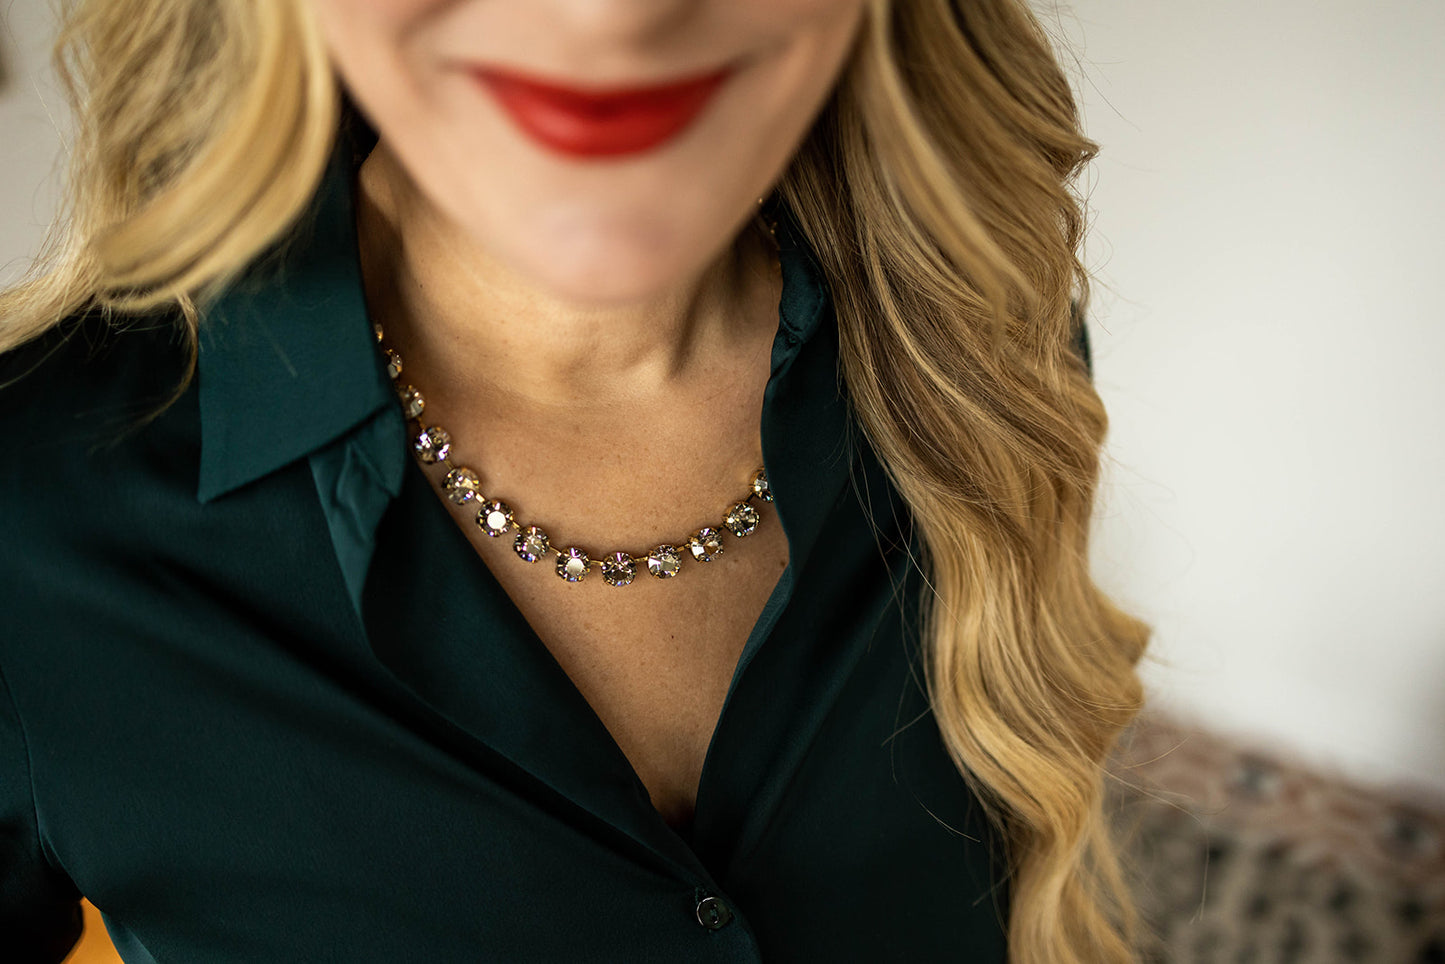 everson holiday edition necklace by tova